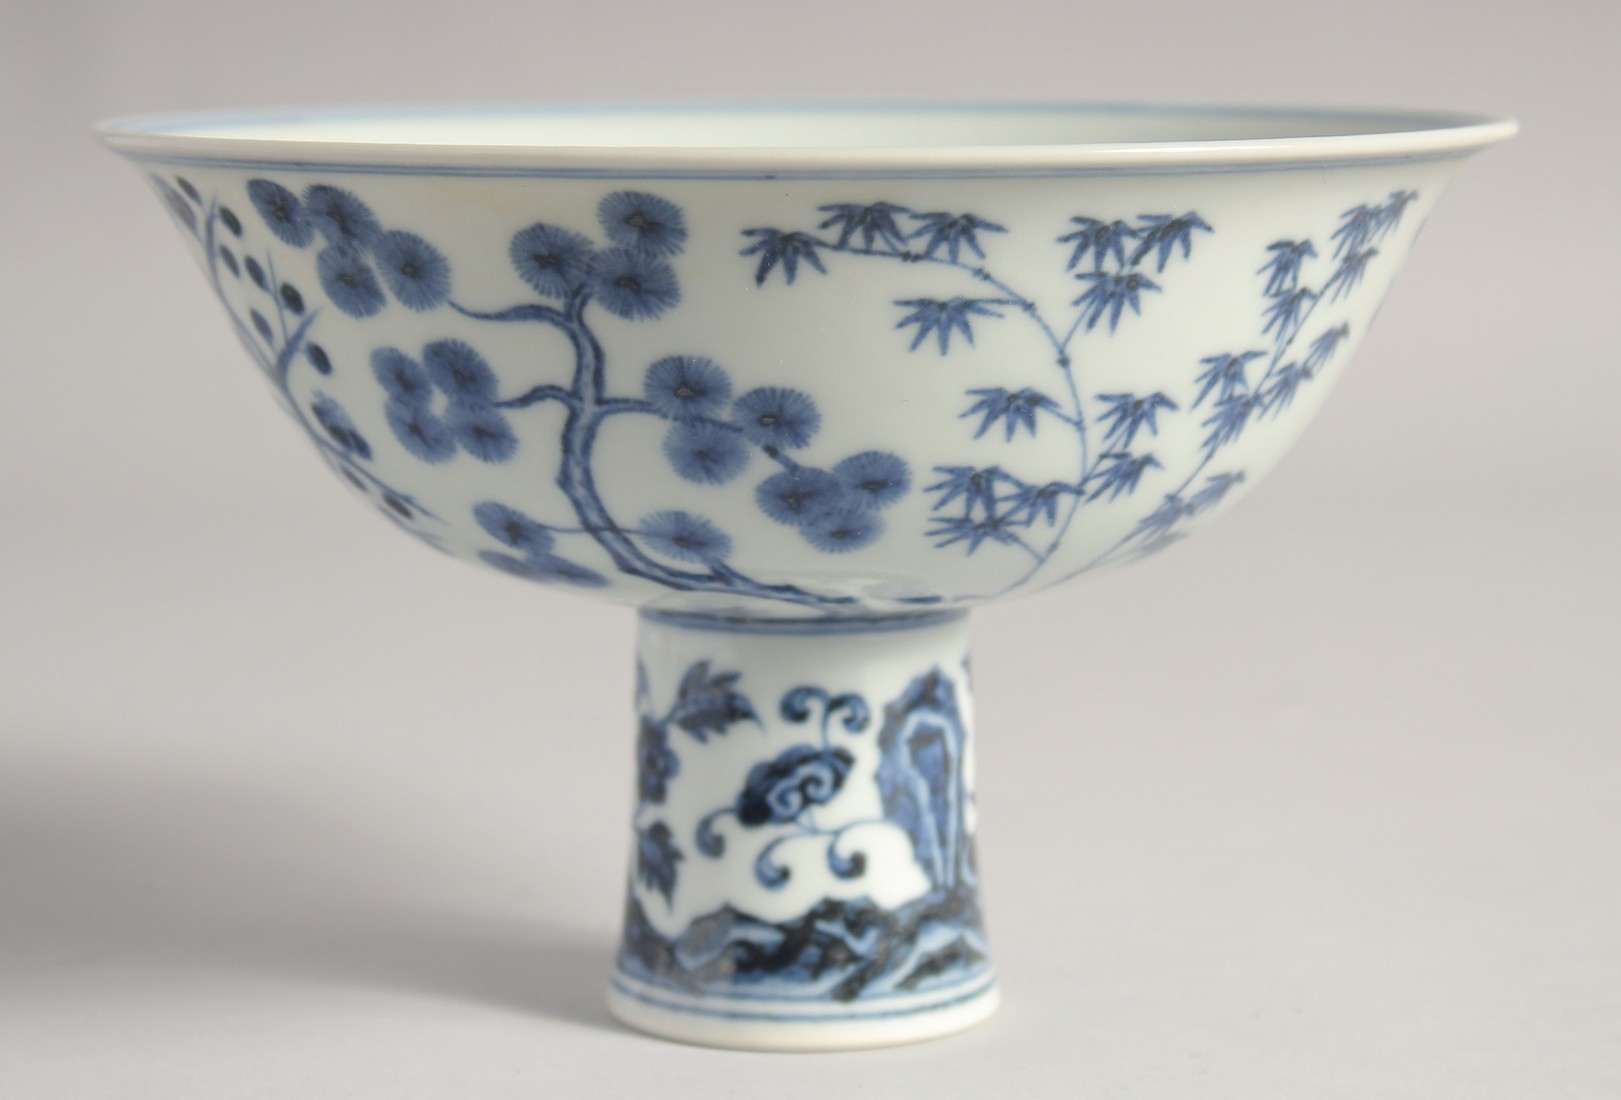 A CHINESE BLUE AND WHITE PORCELAIN PEDESTAL BOWL, the interior with six-character mark, 17cm